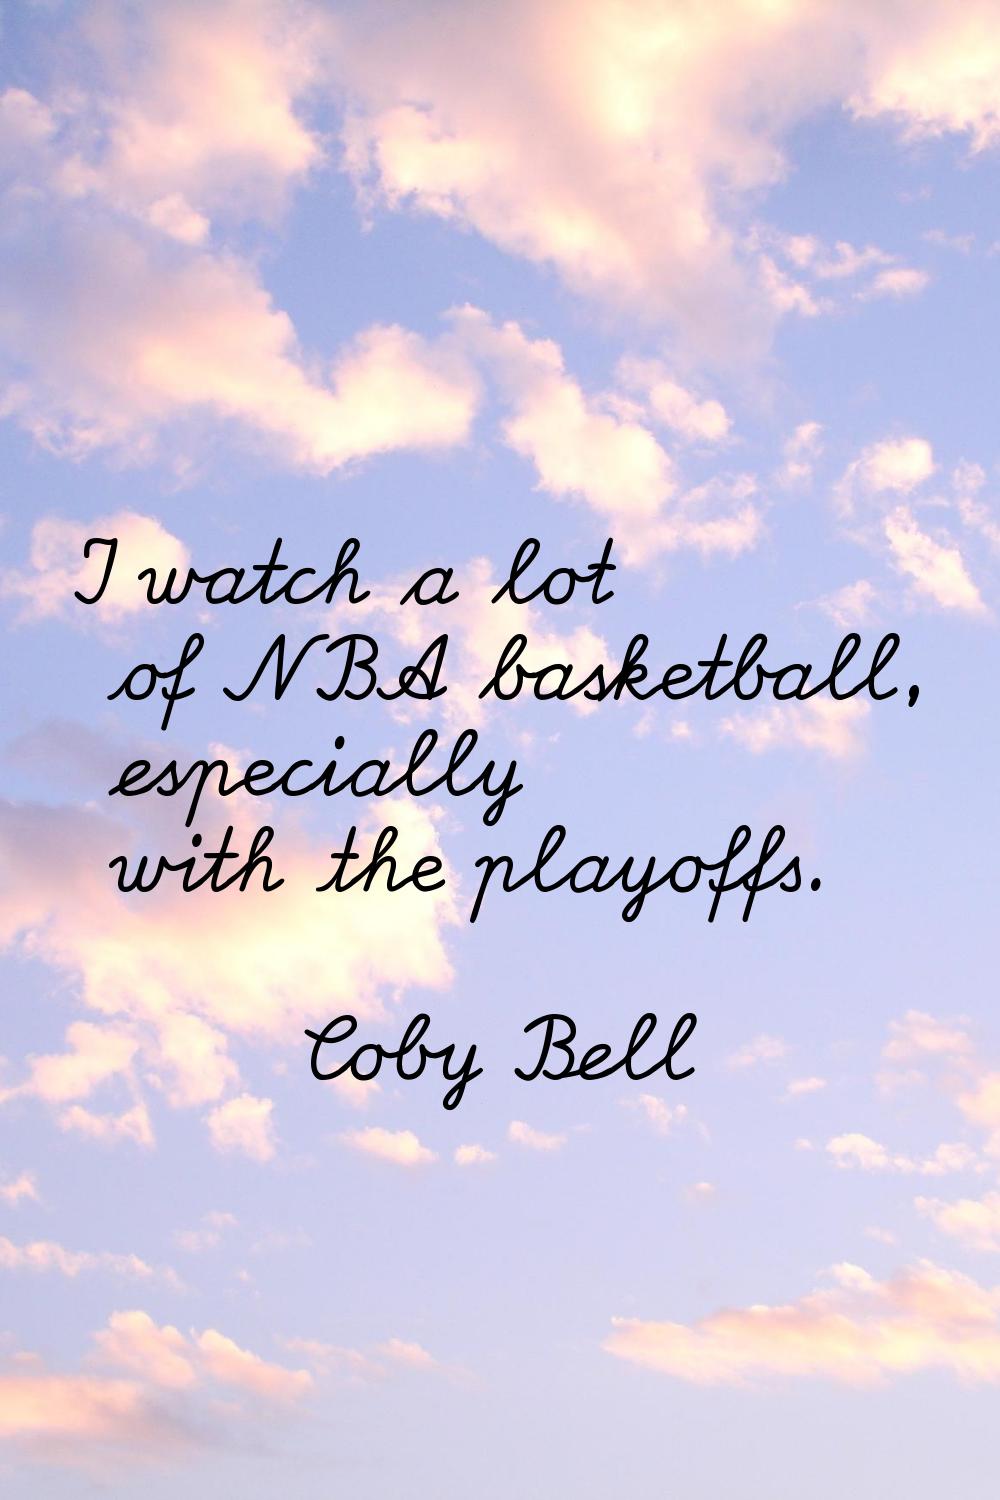 I watch a lot of NBA basketball, especially with the playoffs.